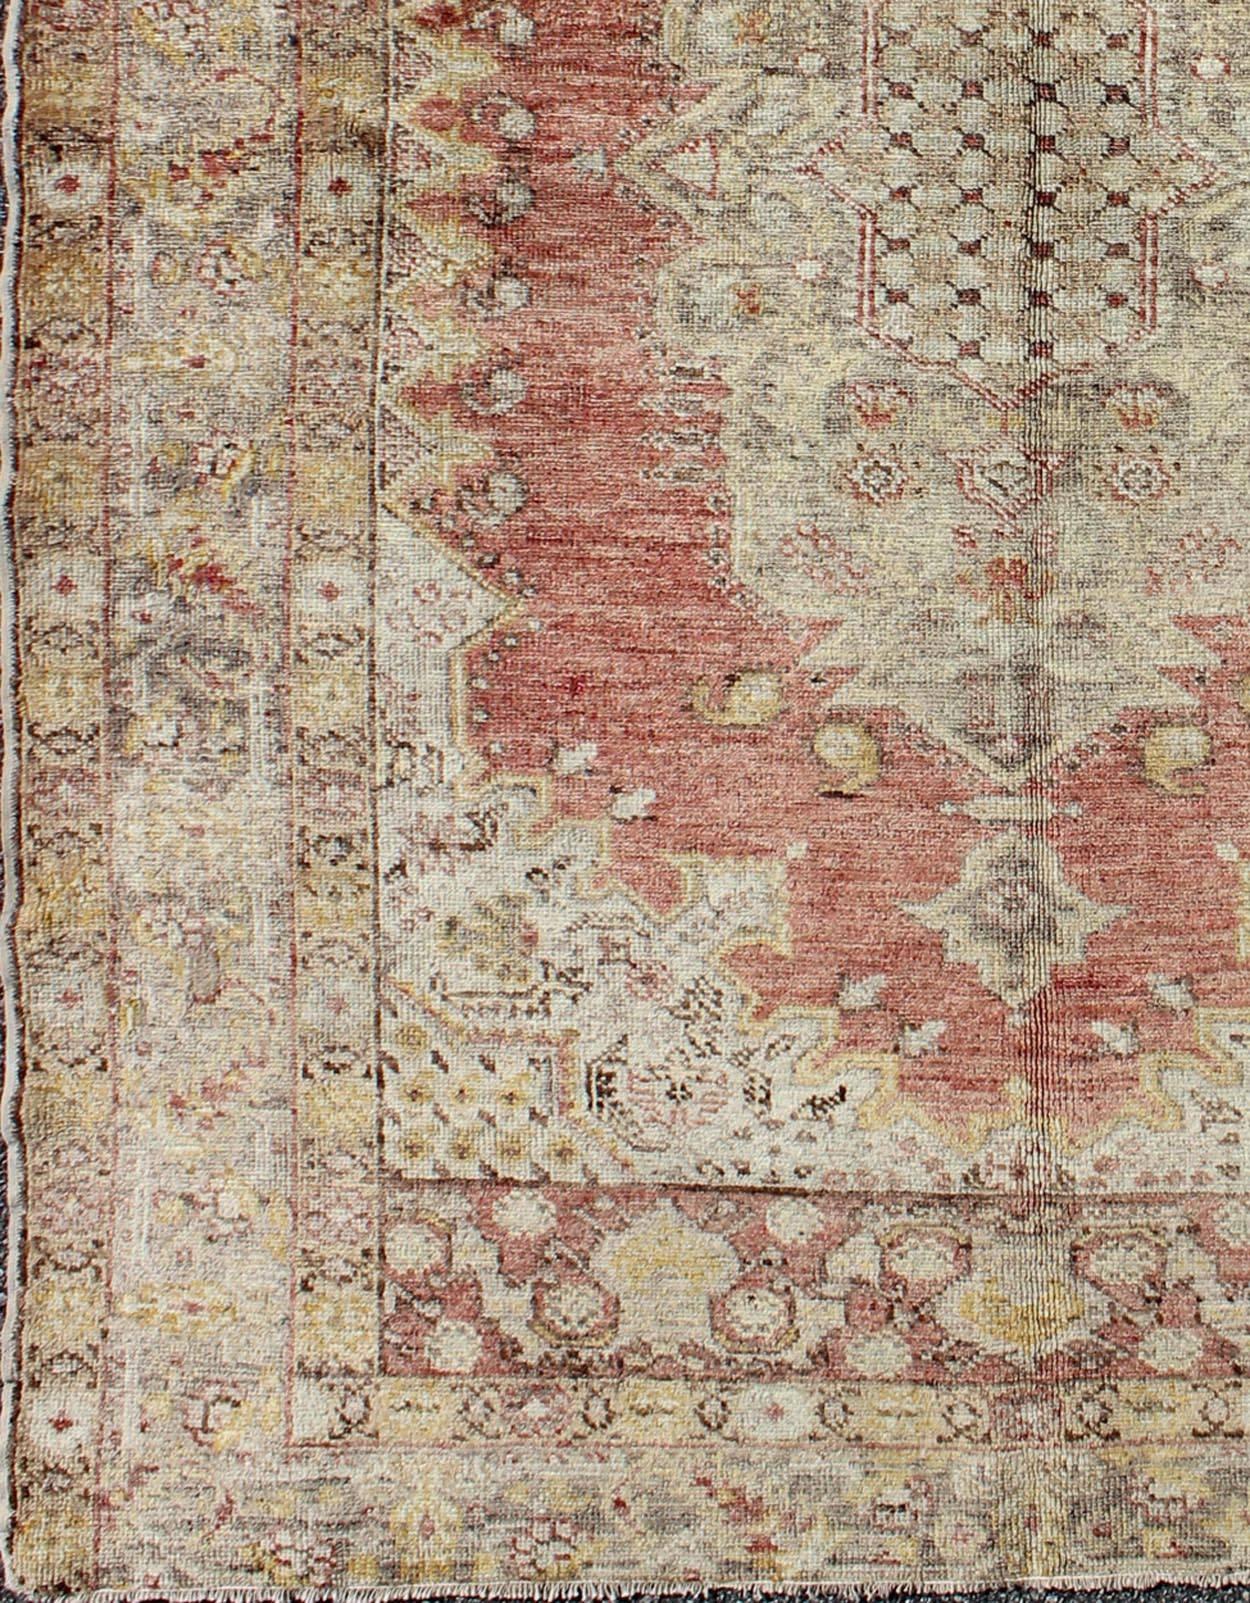 Turkish Antique Sevas Rug with Fine Weave in Cream and Red
rug/na-63181, origin/turkey

This antique Sevas rug features a intricately beautiful design. The multi-layered medallion is complemented by four cornices. The various shades of cream, sand,